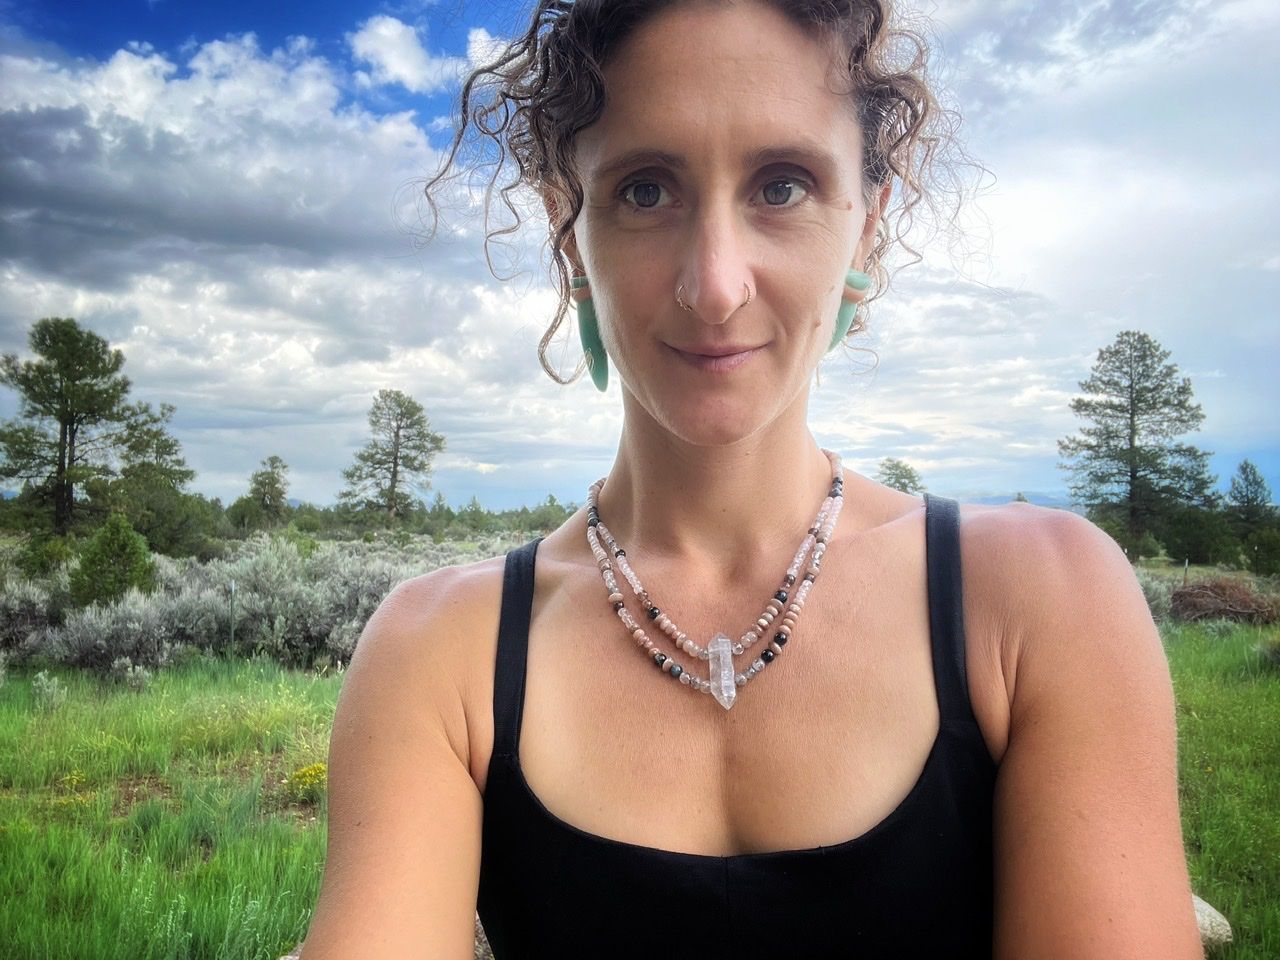 A woman wearing a stone beaded necklace in pale pinks, dusty pinks, black and grays standing in a green field with ponderosa pines behind 